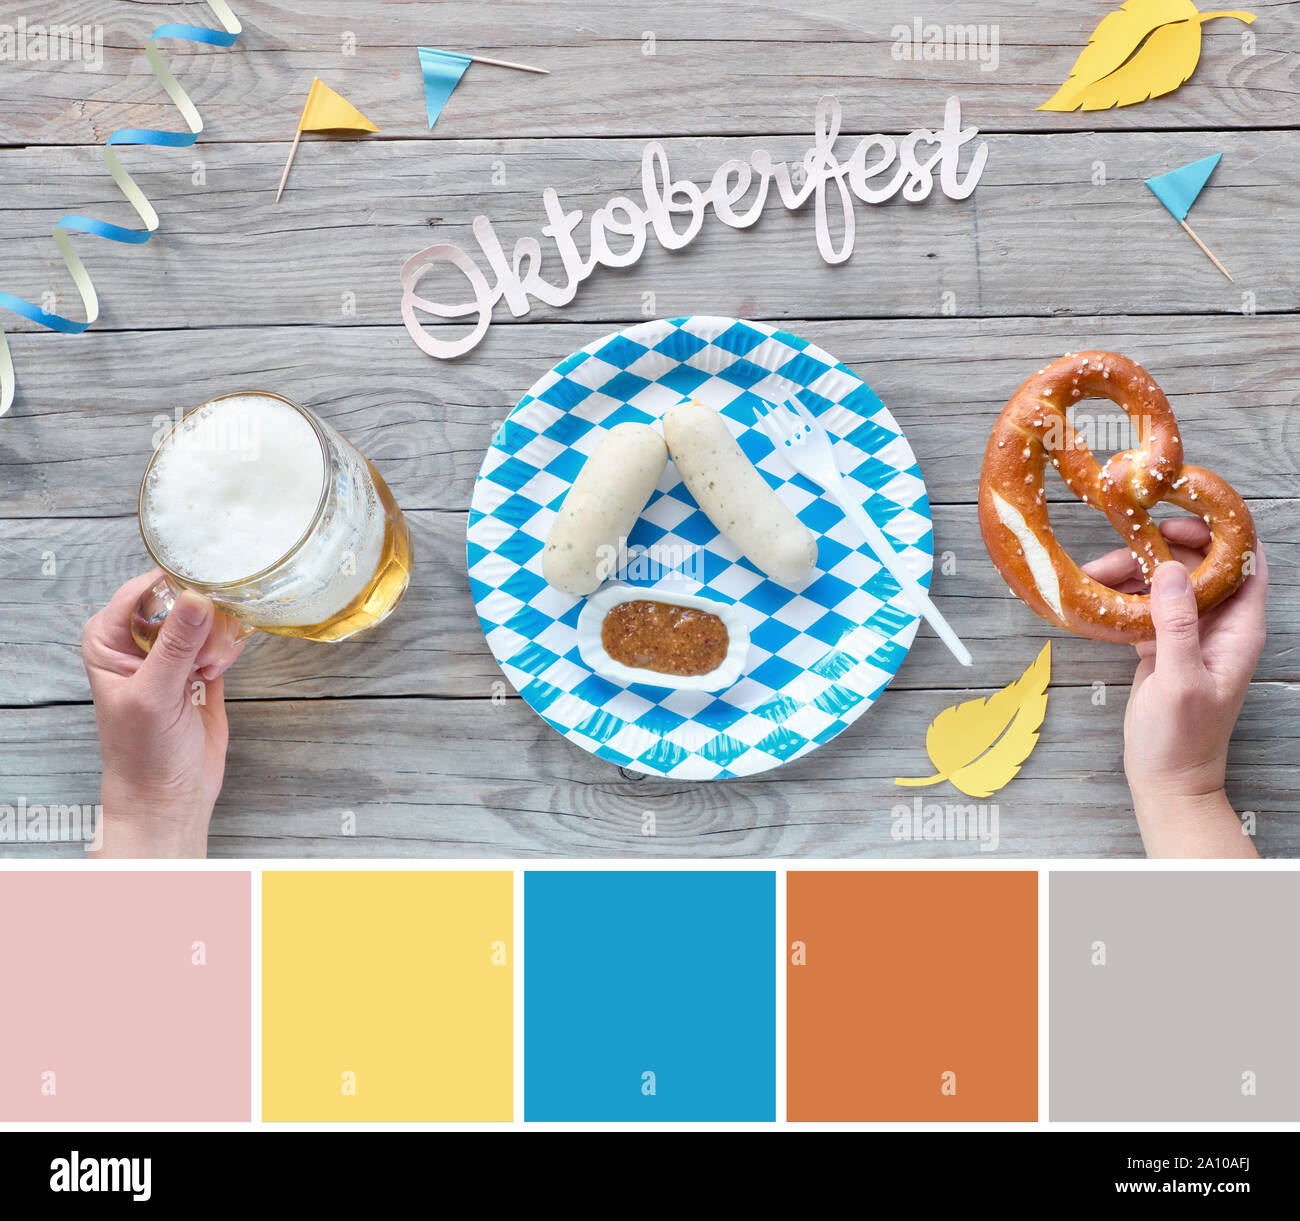 Color matching palette from Oktoberfest food picture with hand holding pretzel and blue-white decorations Stock Photo